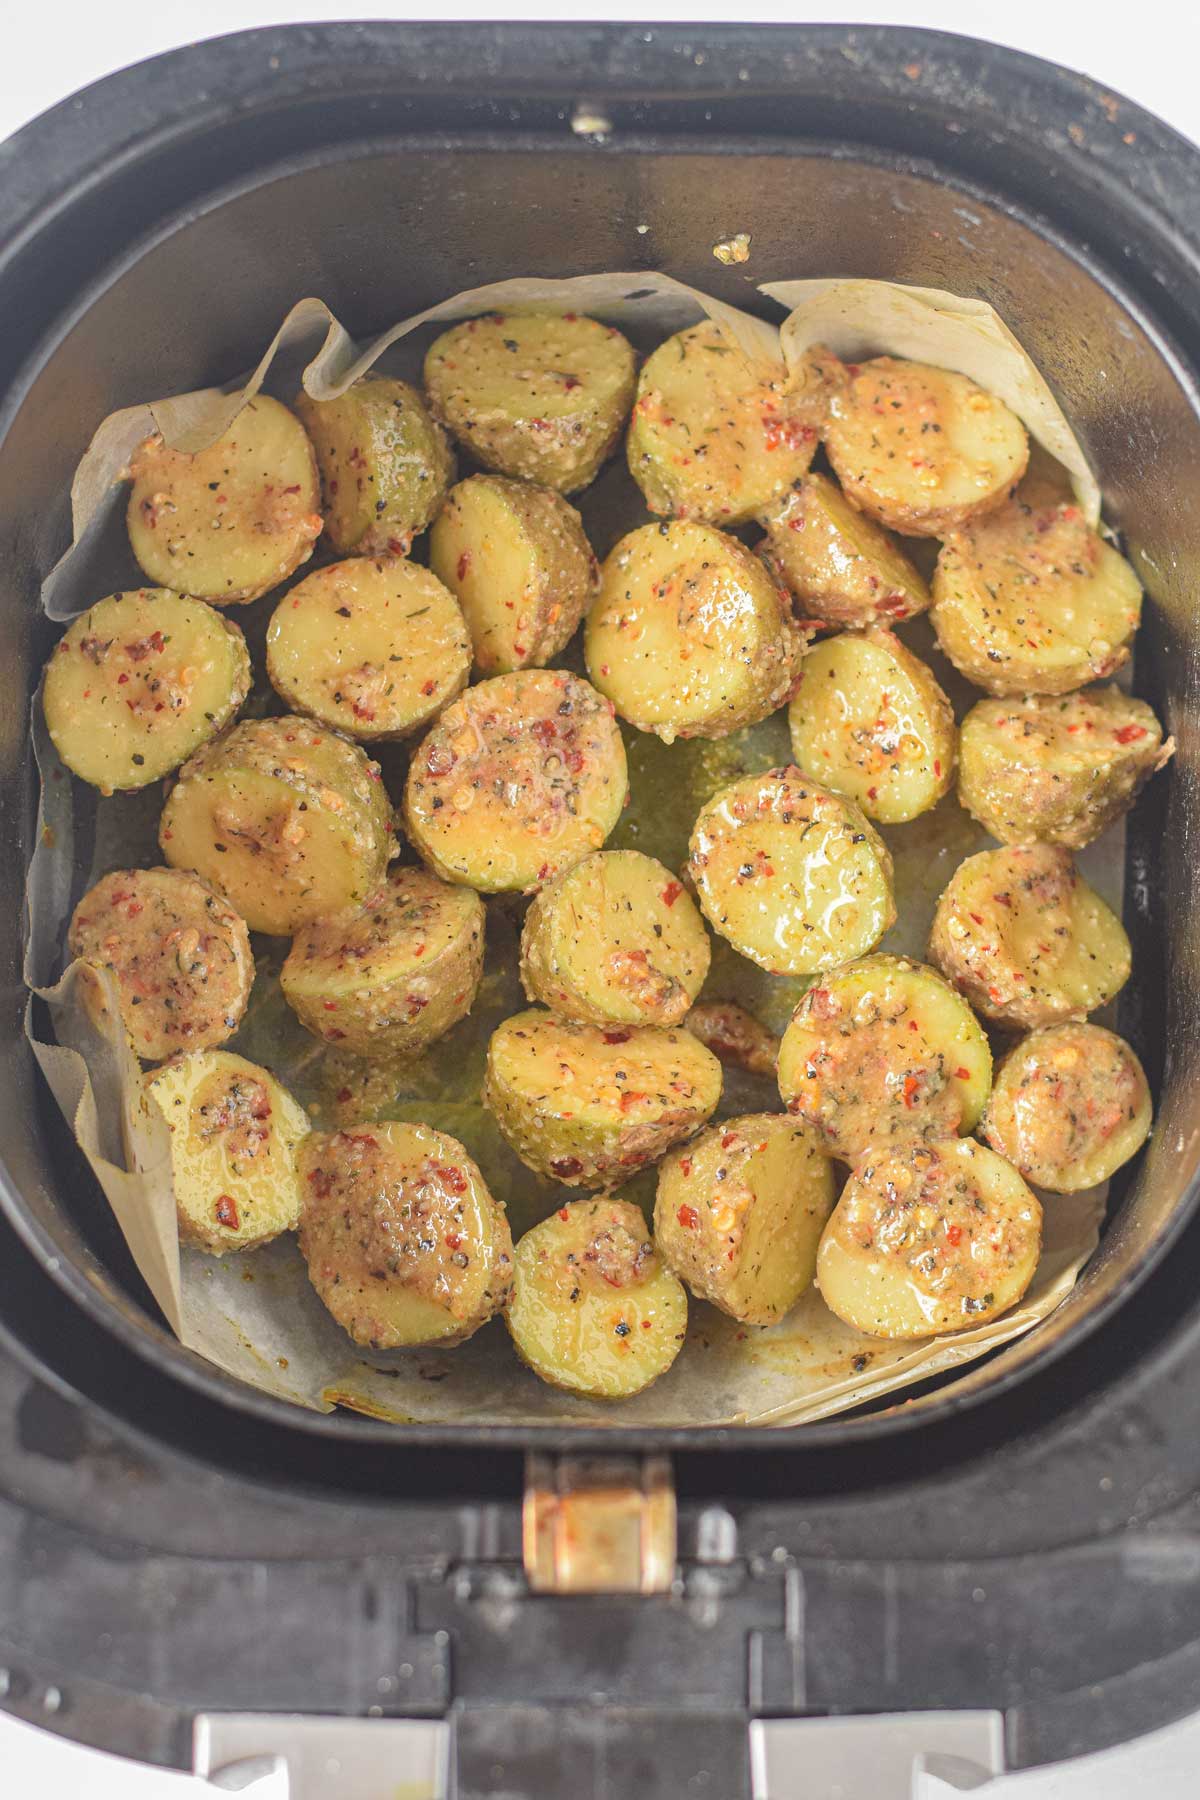 Putting the coated Air Fryer Parmesan Potatoes in an air fryer